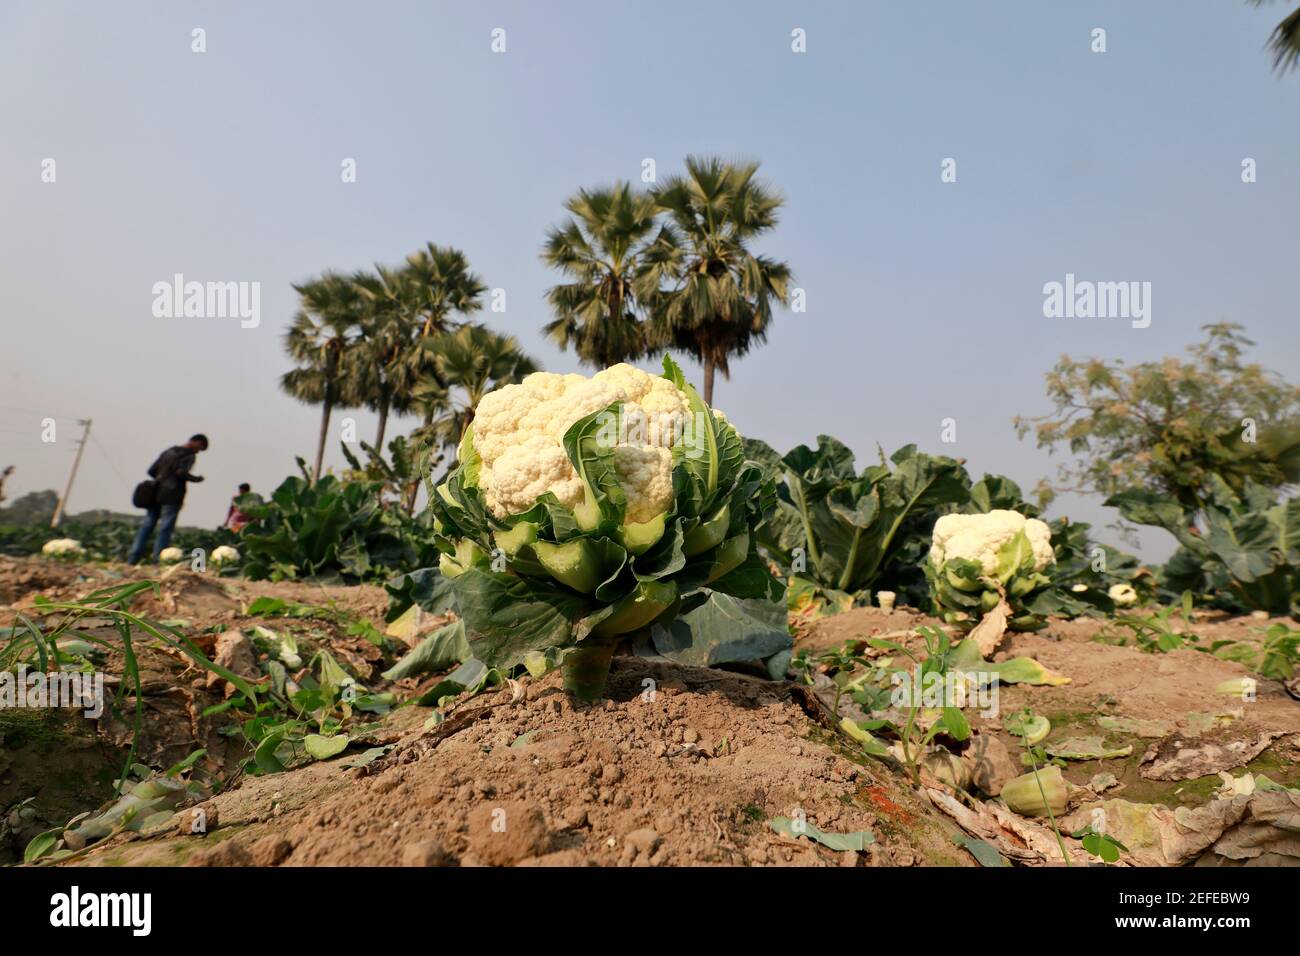 Khulna, Bangladesh - February 06, 2021: The farmers are picking winter vegetable cauliflower from their fields for sale in the market at Dumuria in Kh Stock Photo